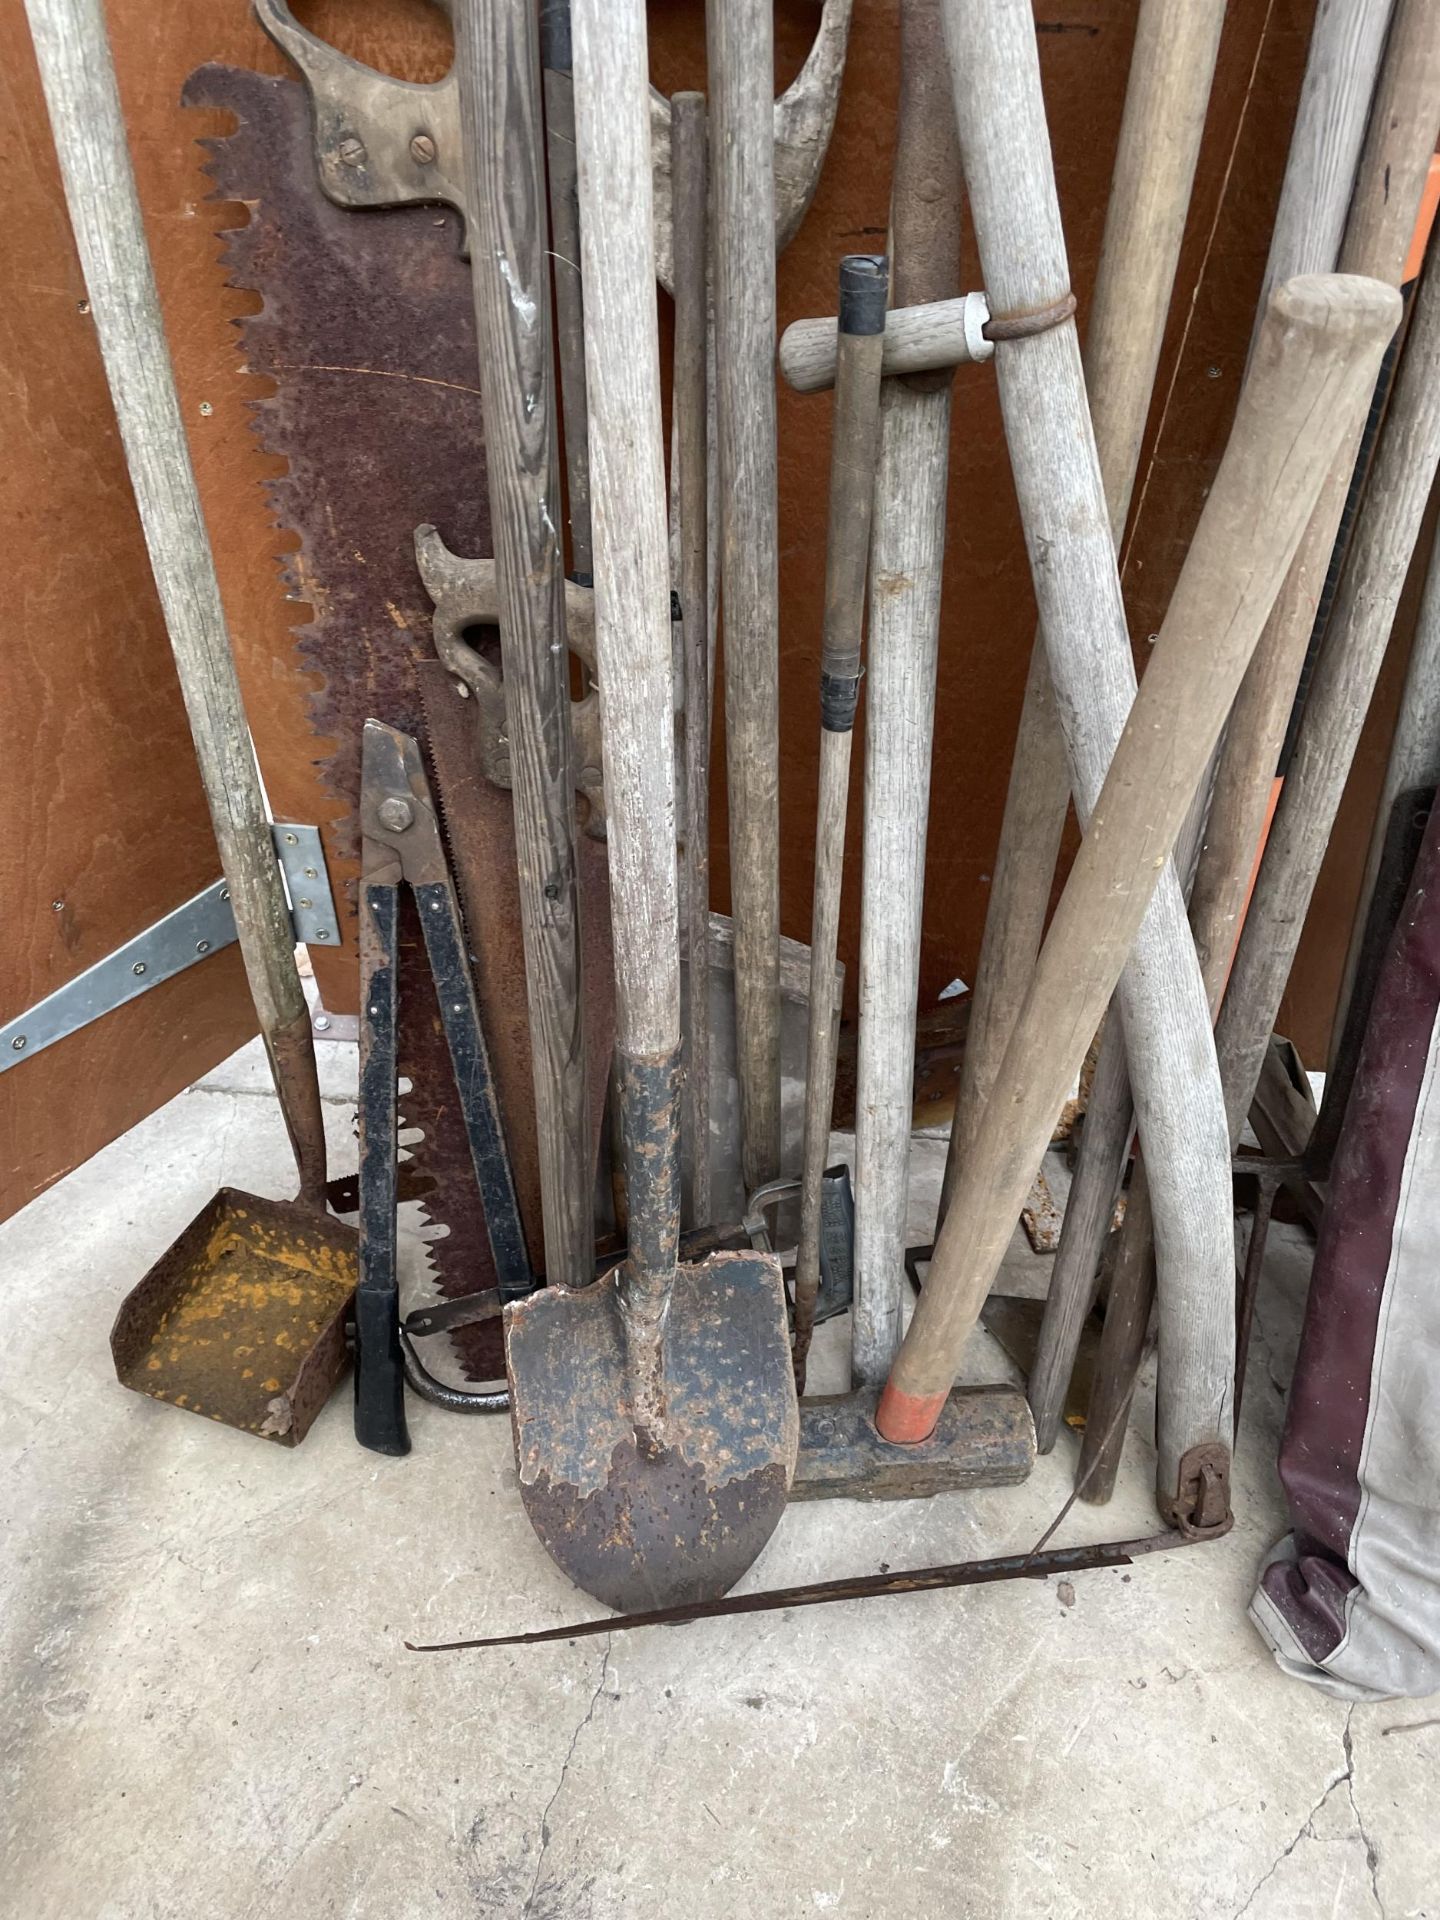 A LARGE ASSORTMENT OF VINTAGE GARDEN TOOLS TO INCLUDE A SLEDGE HAMMER, SPADES AND LARGE SAWS ETC - Image 5 of 7